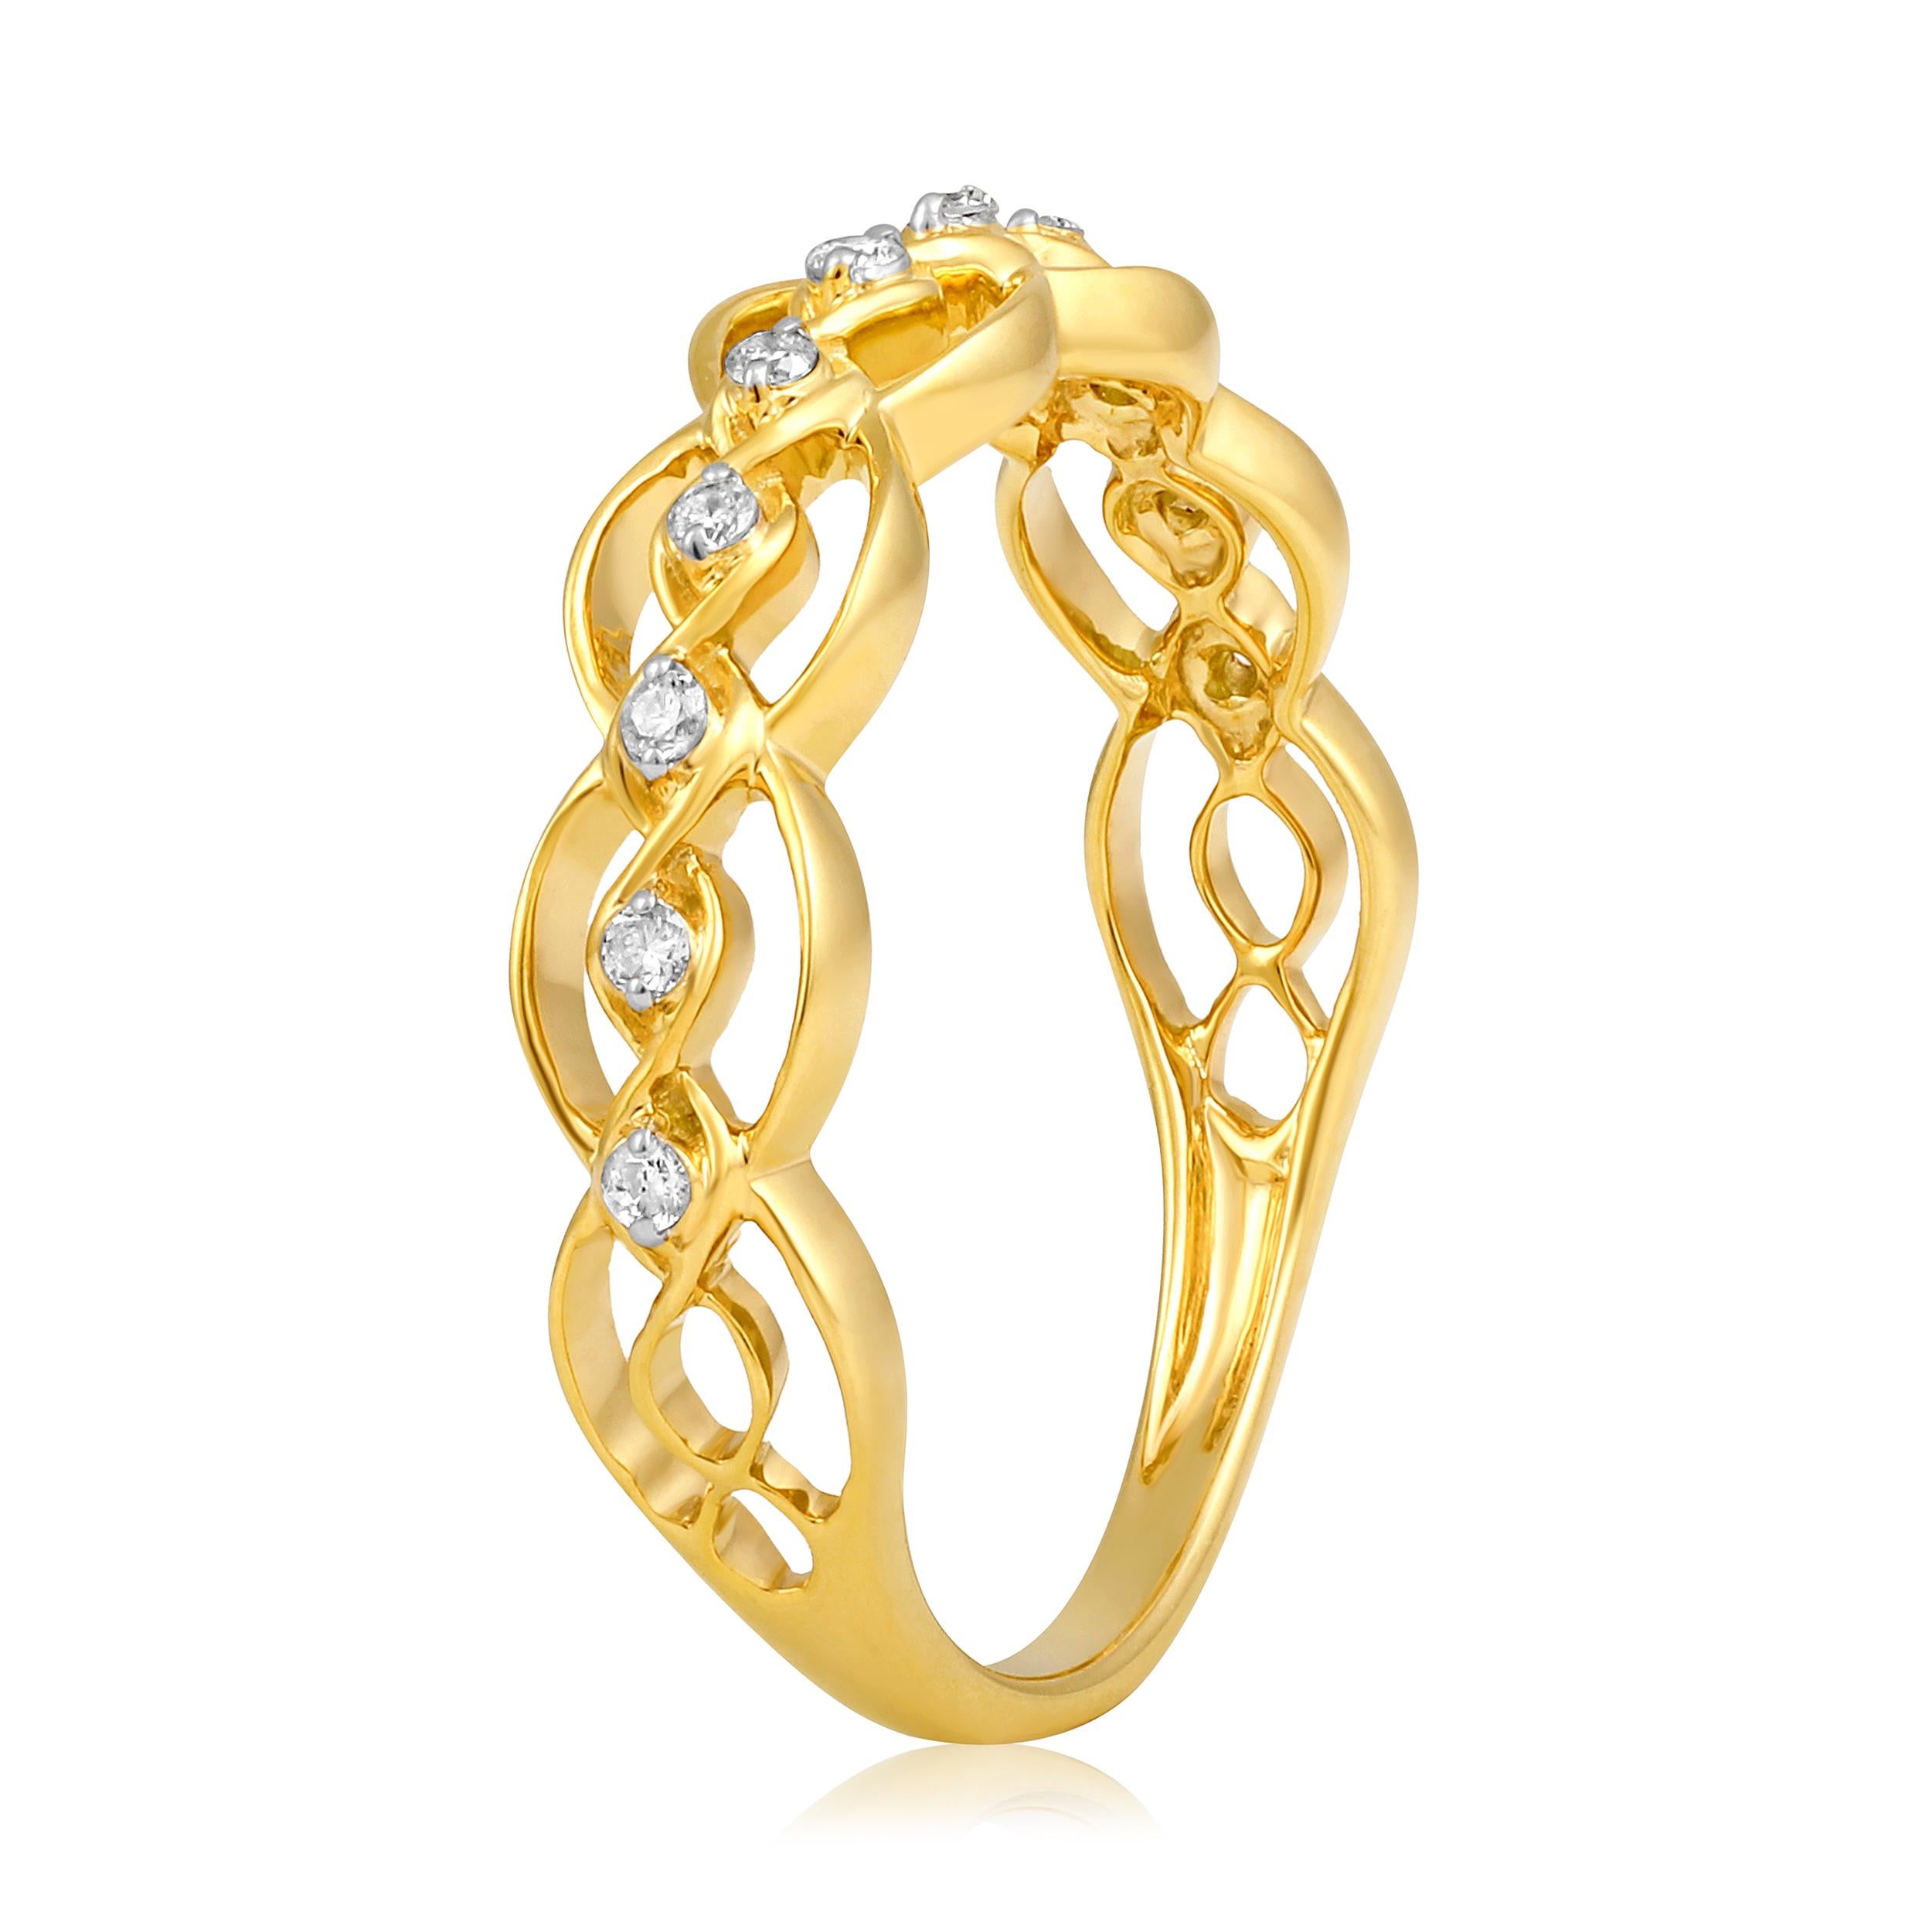 Ring Size: US 7

Crafted in 1.72 grams of 10K Yellow Gold, the ring contains 11 stones of Round Diamonds with a total of 0.15 carat in F-G color and I1-I2 clarity.

CONTEMPORARY AND TIMELESS ESSENCE: Crafted in 14-karat/18-karat with 100% natural